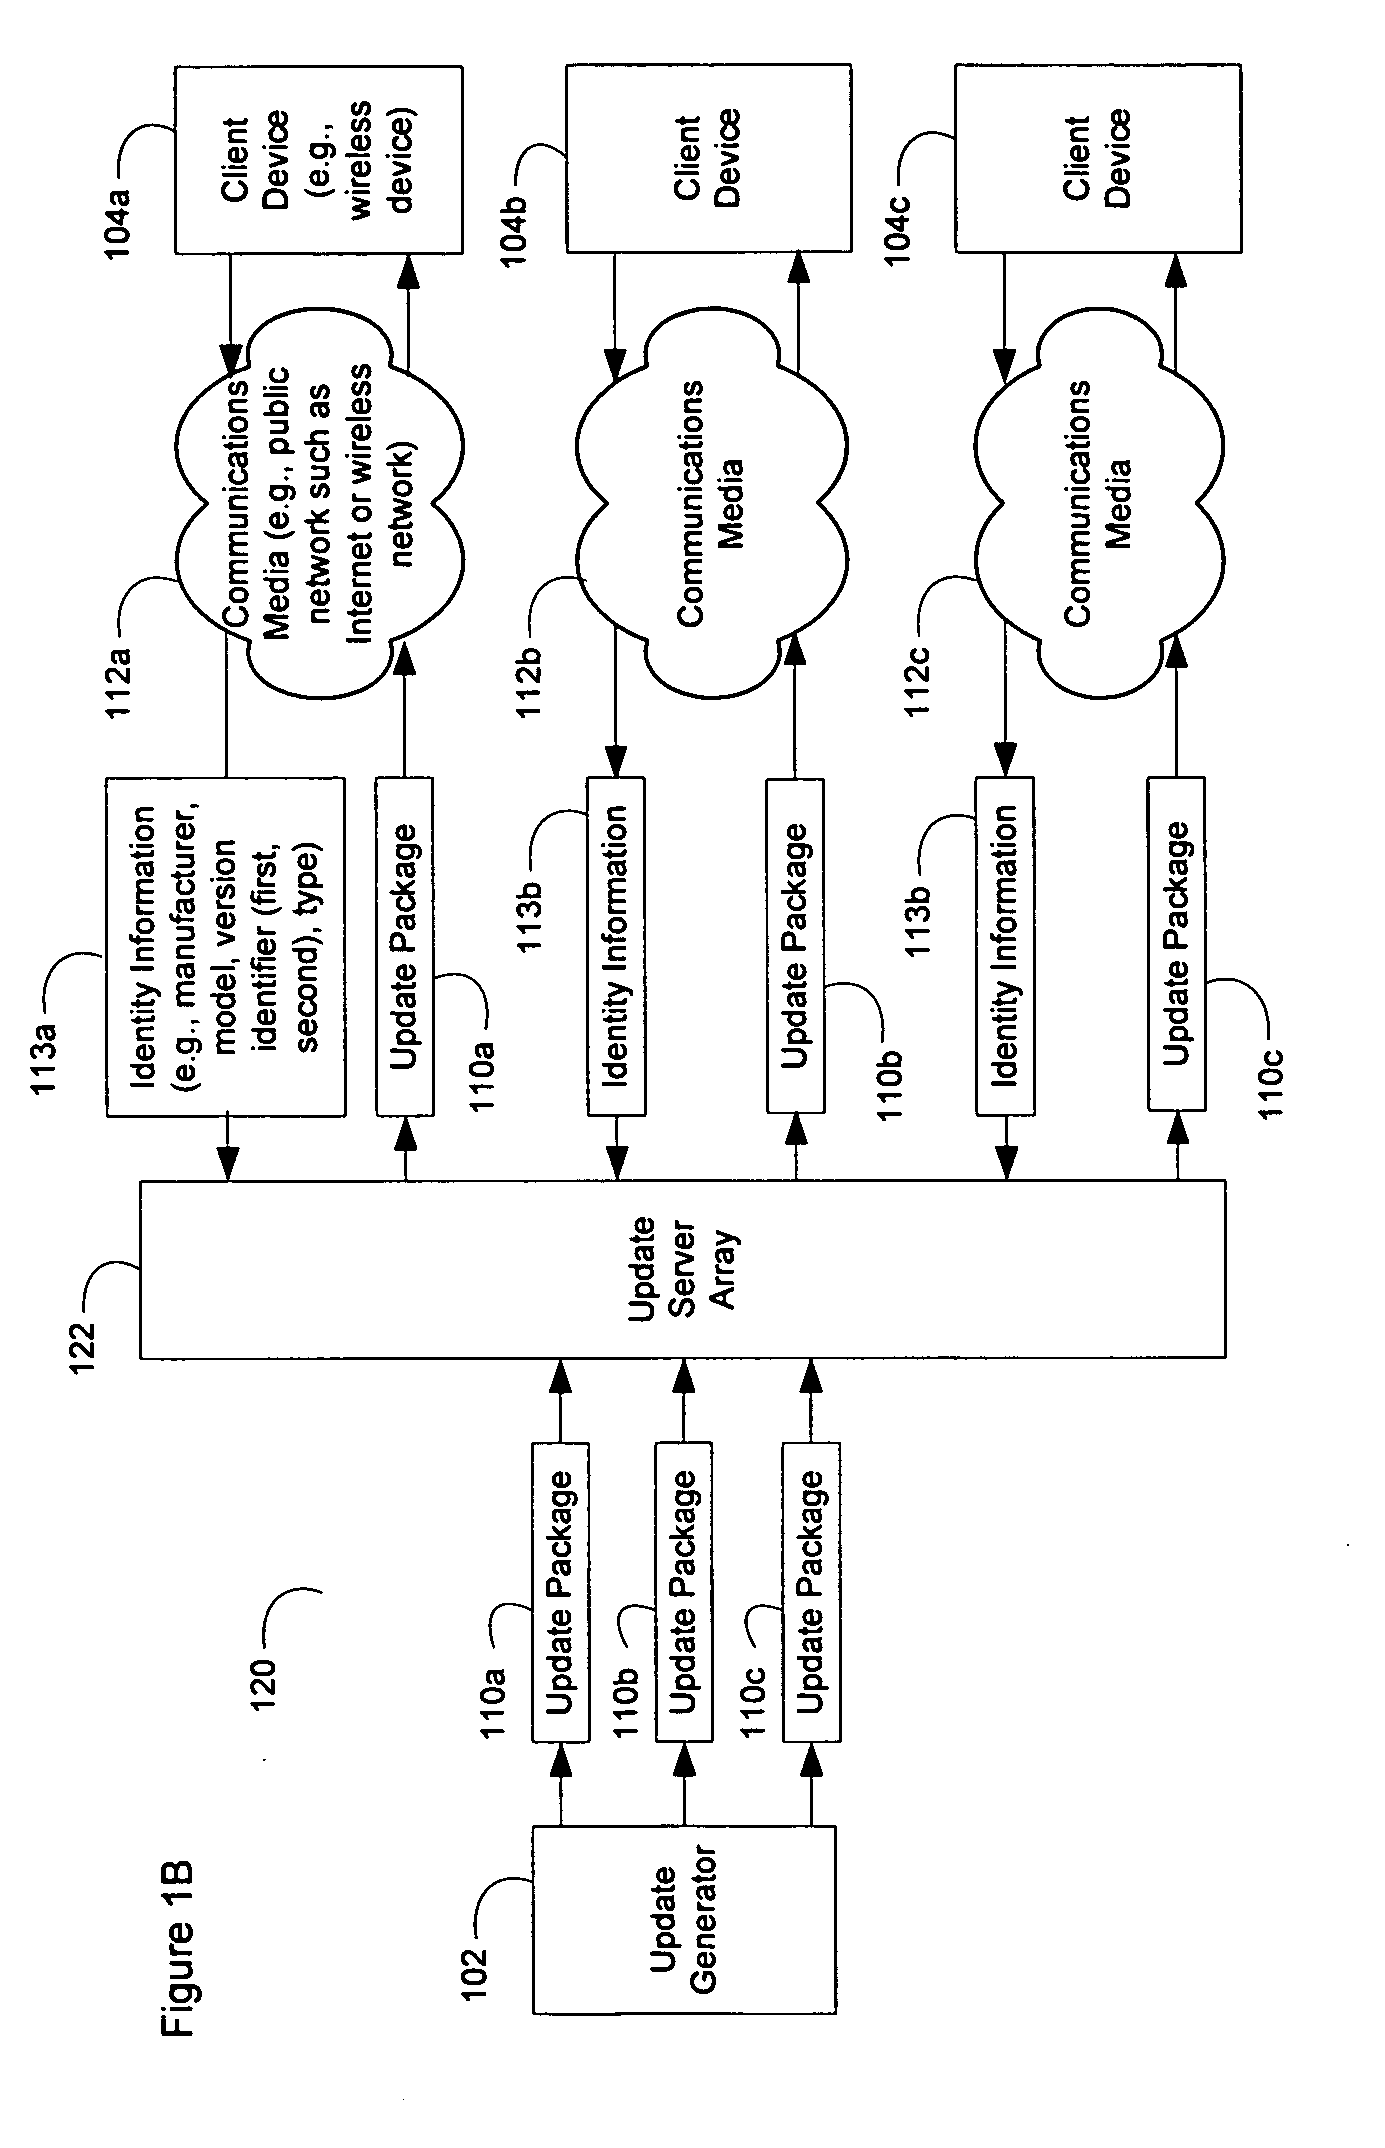 System and method for updating and distributing information